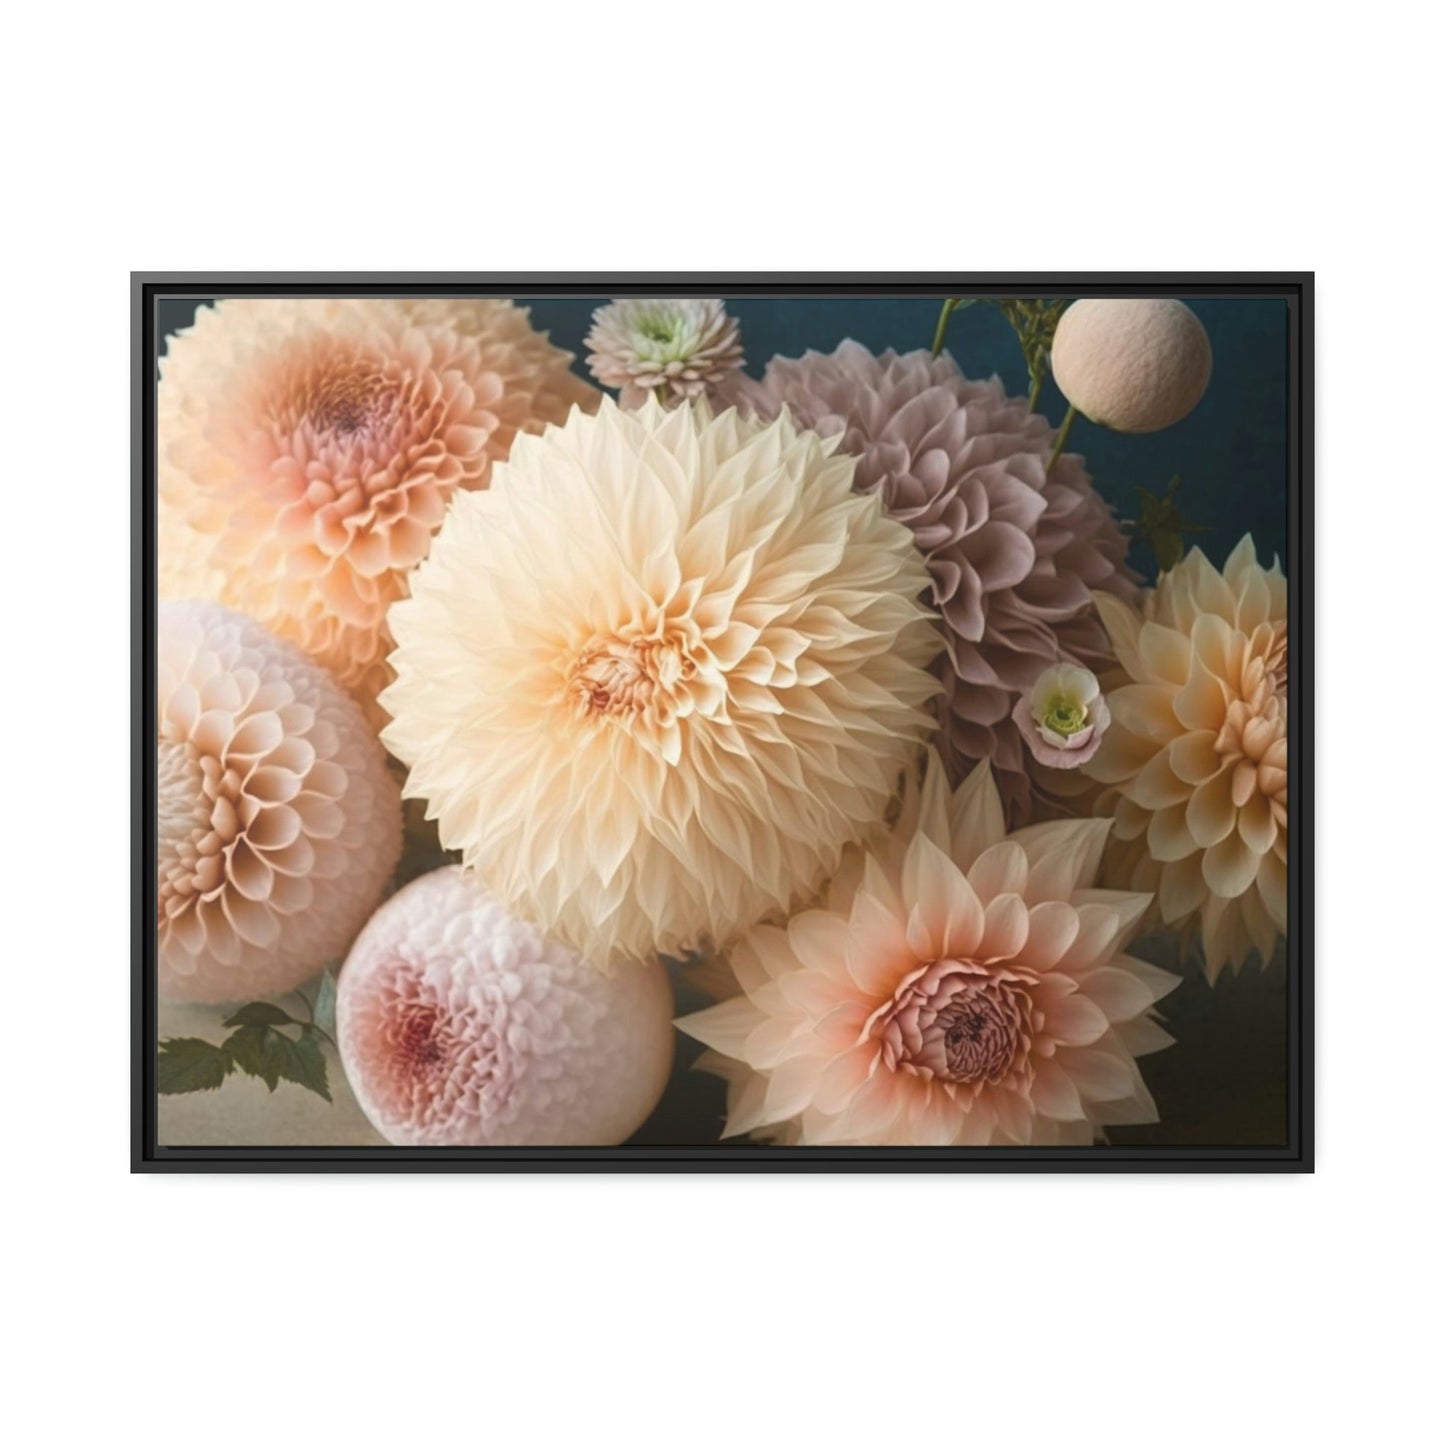 Dahlias in Bloom: A Natural Canvas & Poster Print of Stunning Flowers